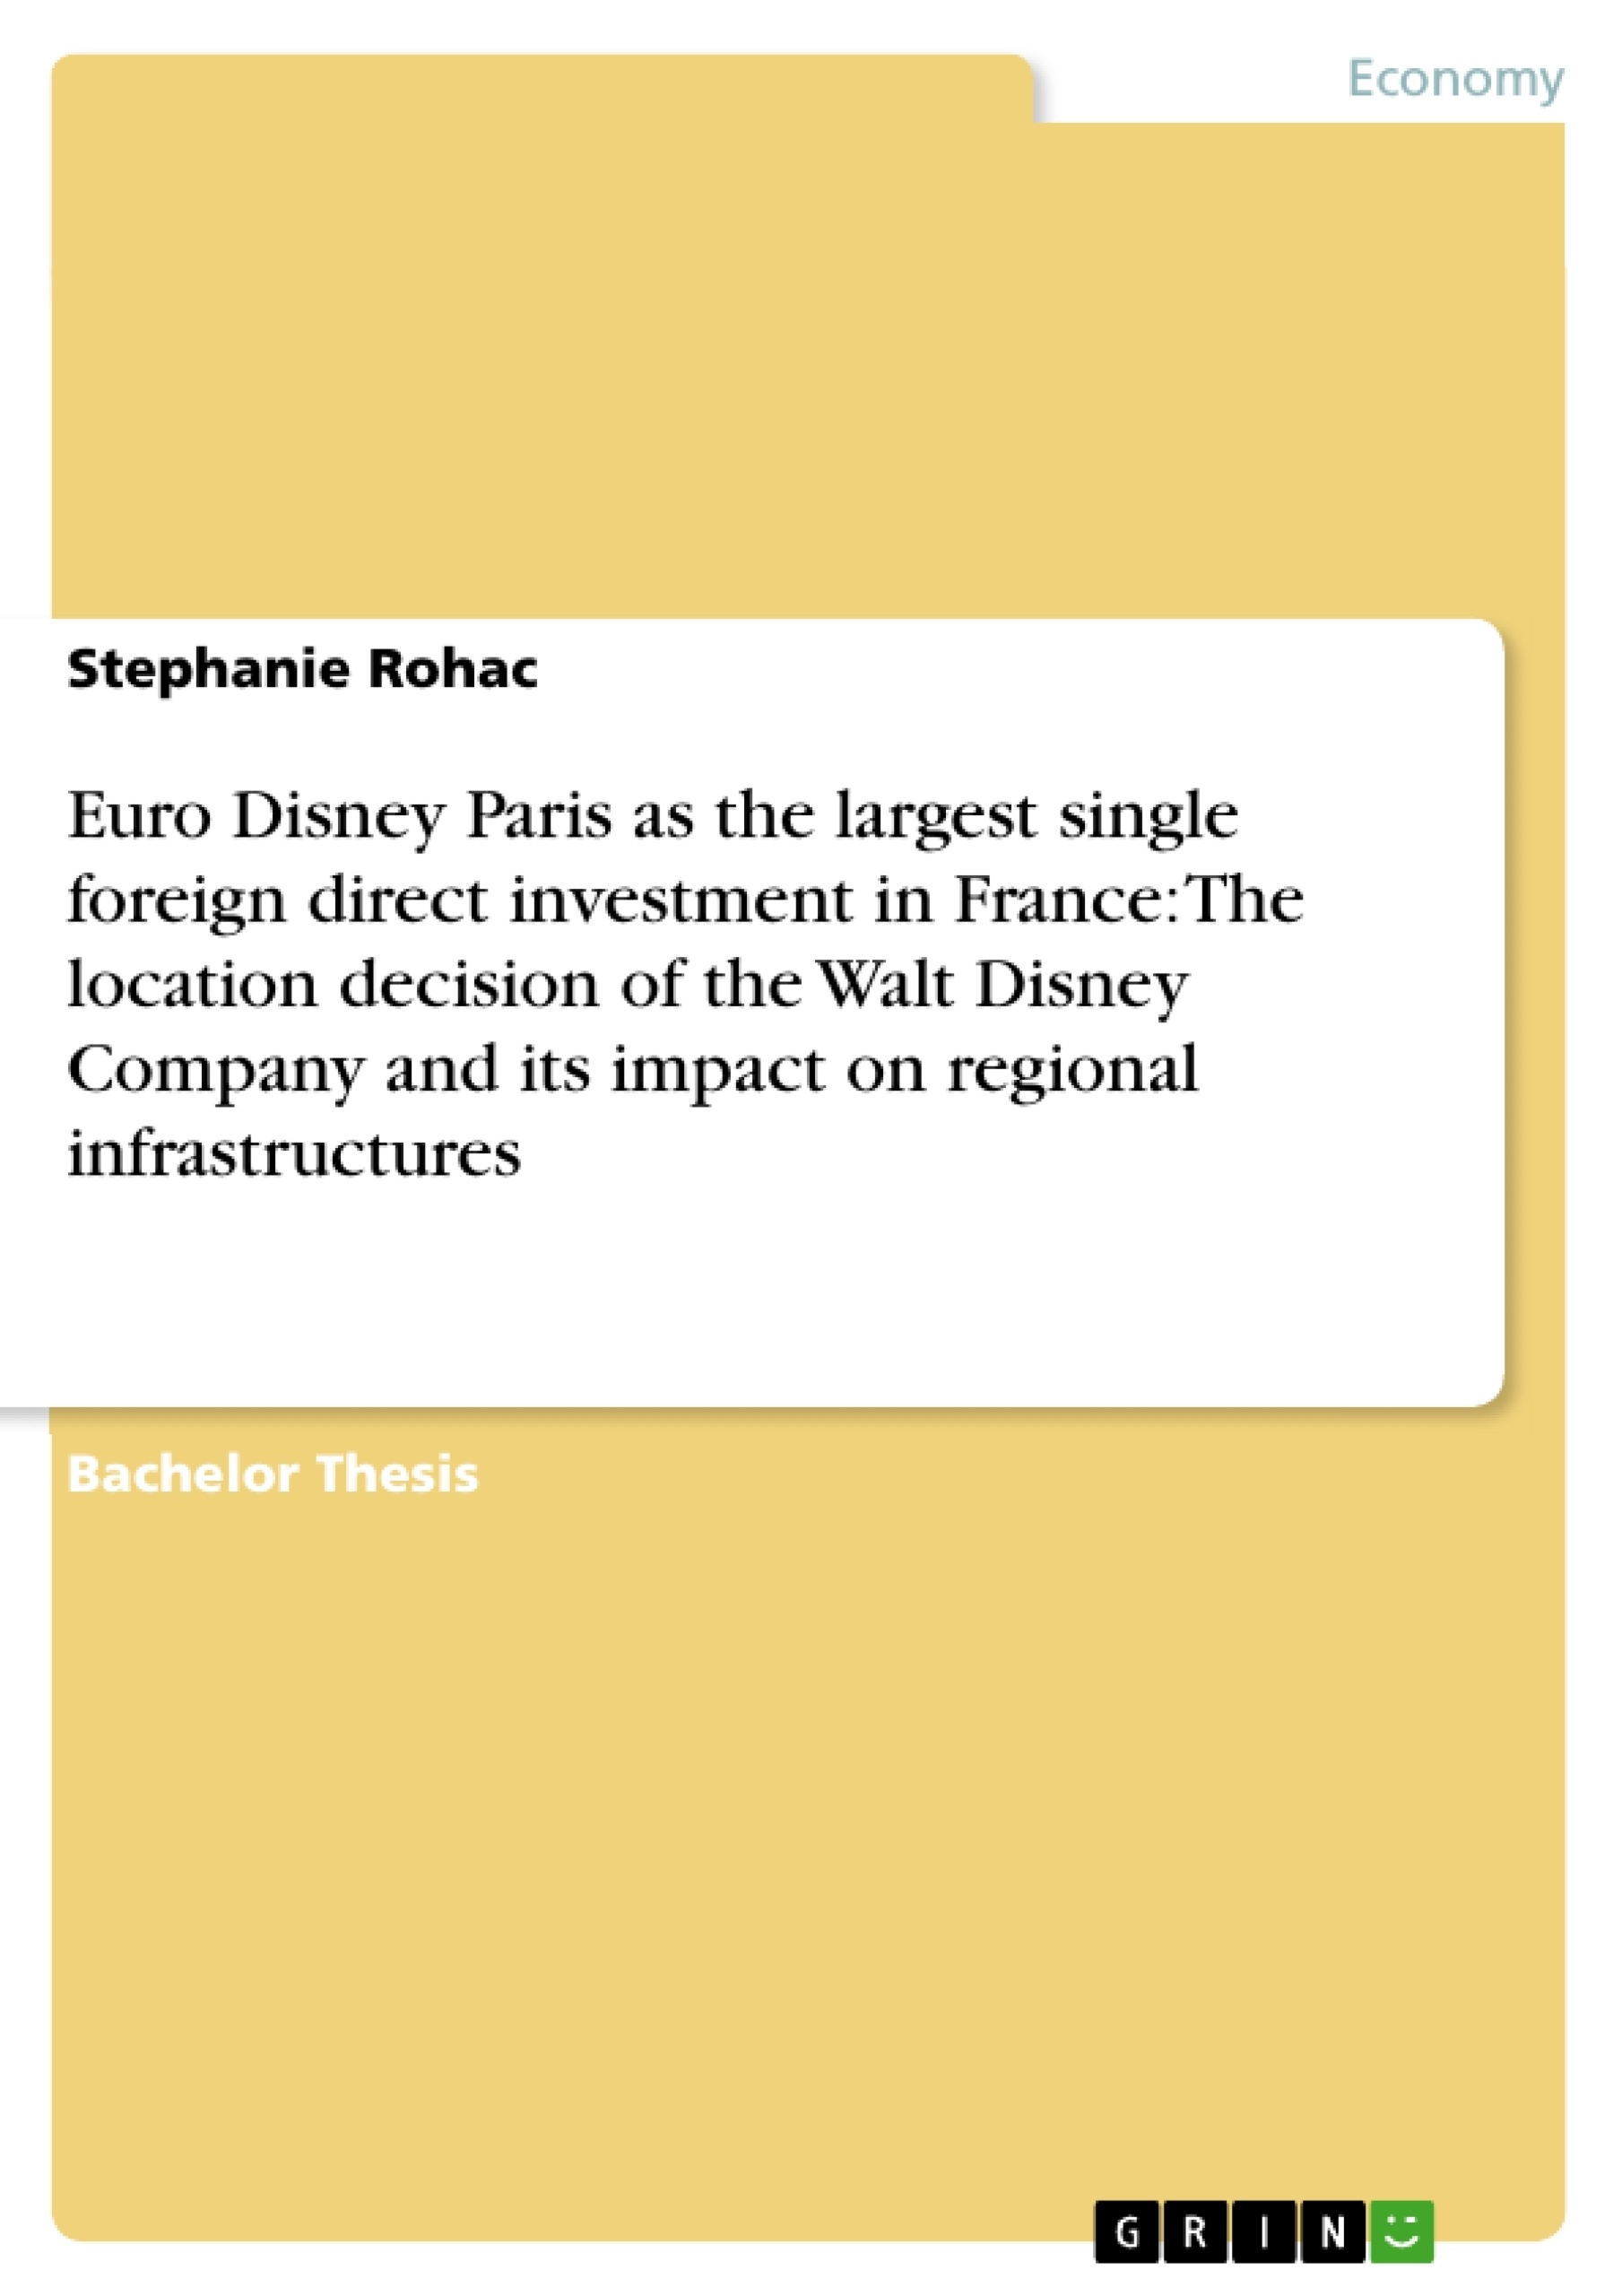 Titre: Euro Disney Paris as the largest single foreign direct investment in France: The location decision of the Walt Disney Company and its impact on regional infrastructures